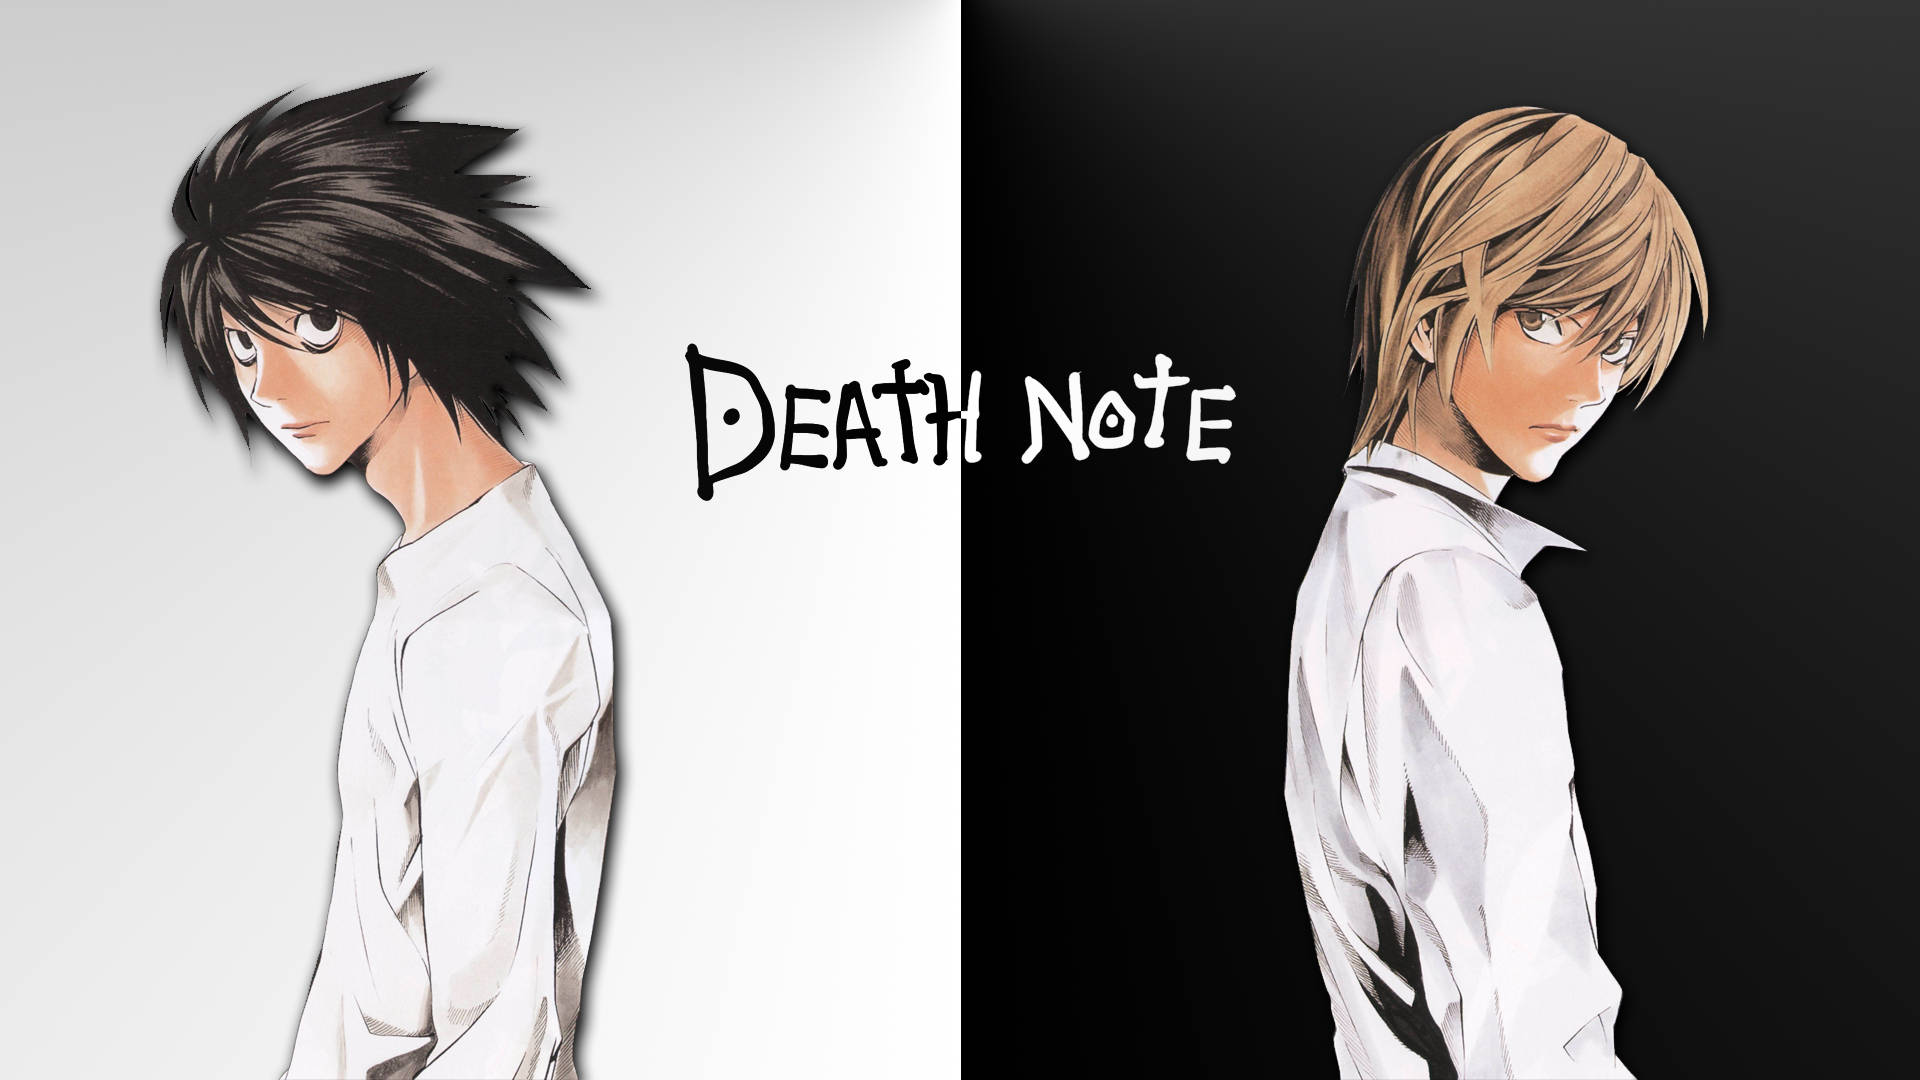 Art of Death Note